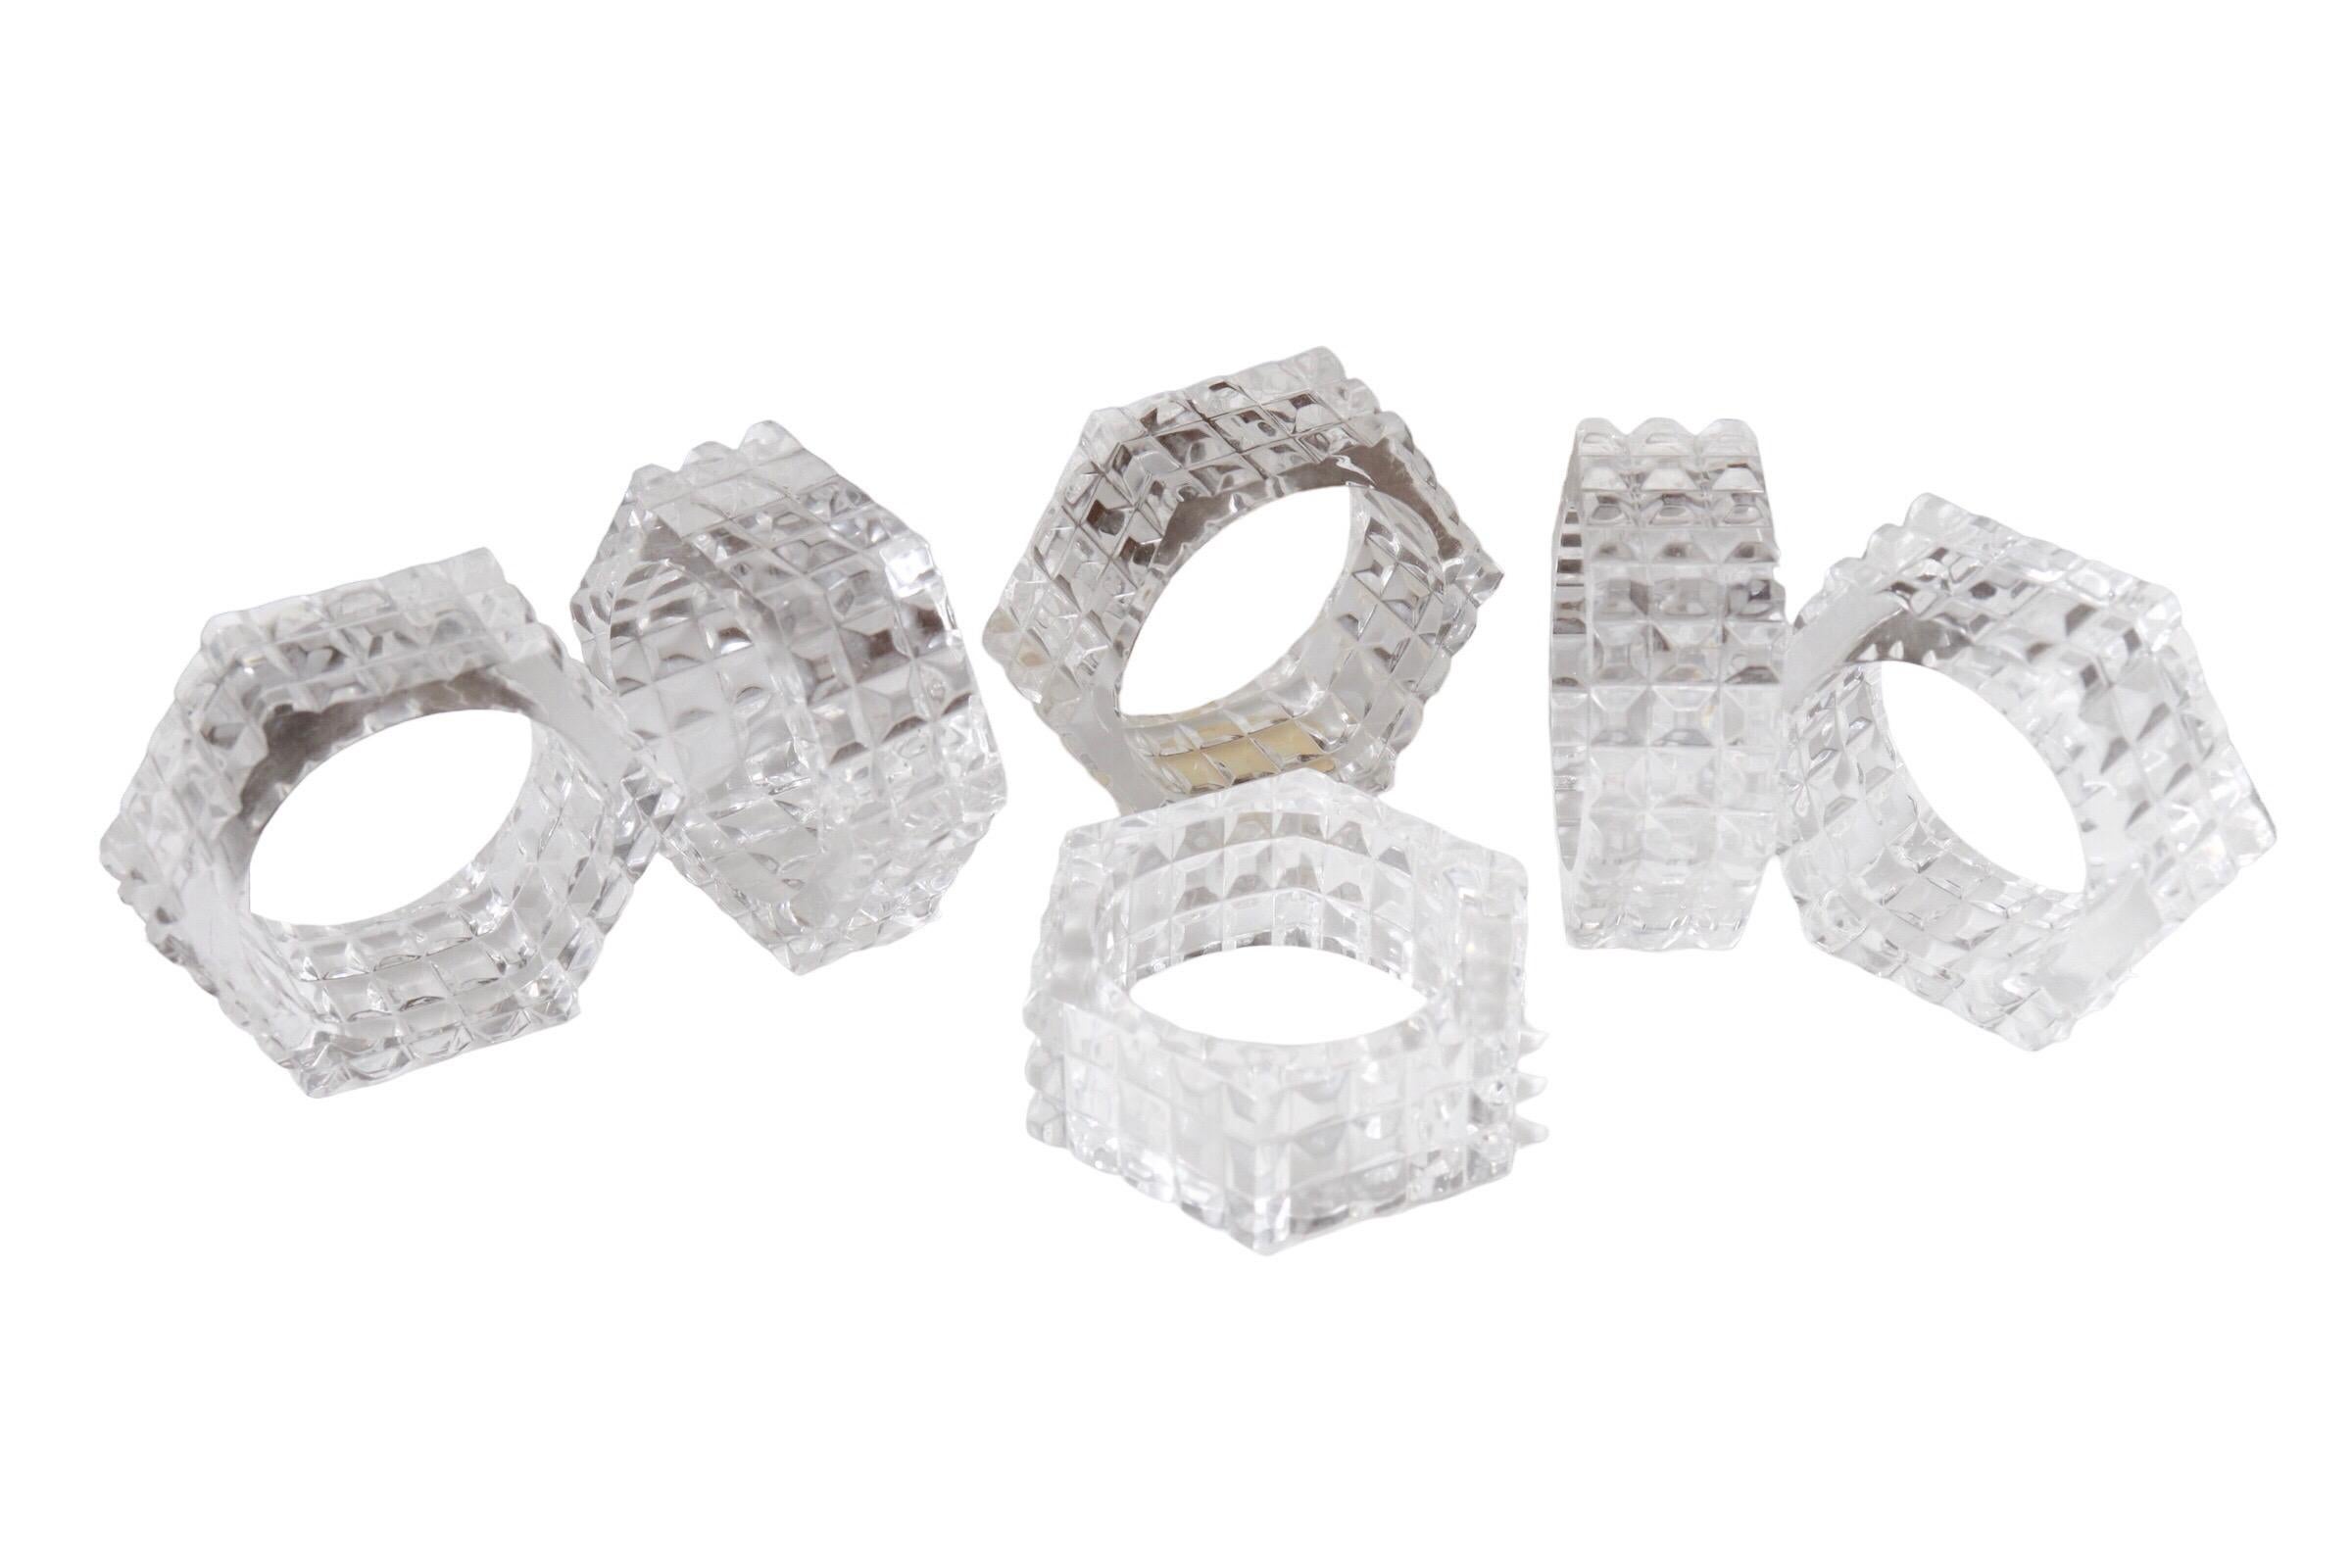 A set of six block cut lead Crystal napkin rings. One has the original yellow and gold label which reads “Genuine Lead Crystall 24% PbO Made in West Germany”. Dimensions per napkin ring.
  